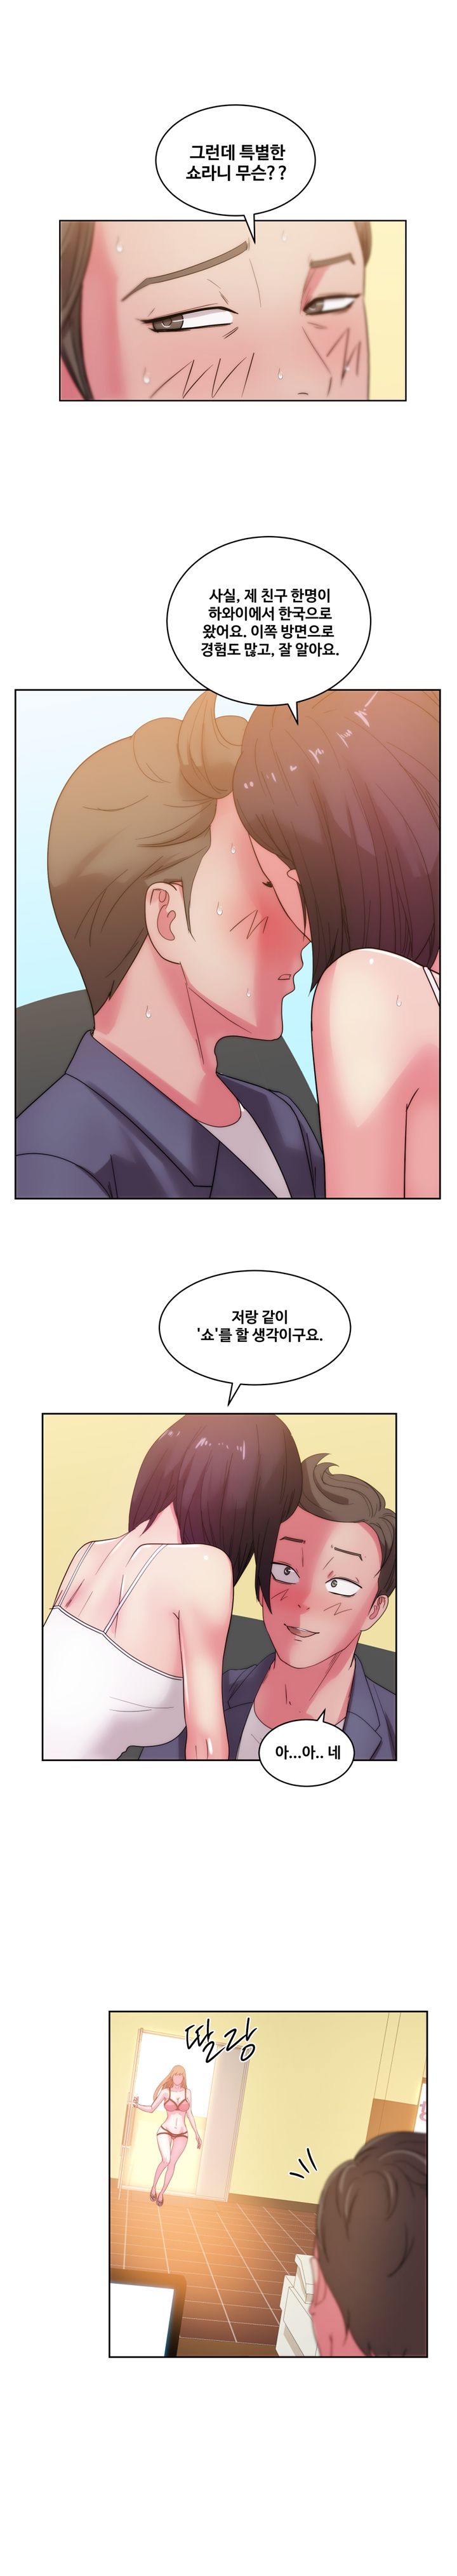 Sooyung Comic Shop Raw - Chapter 27 Page 6